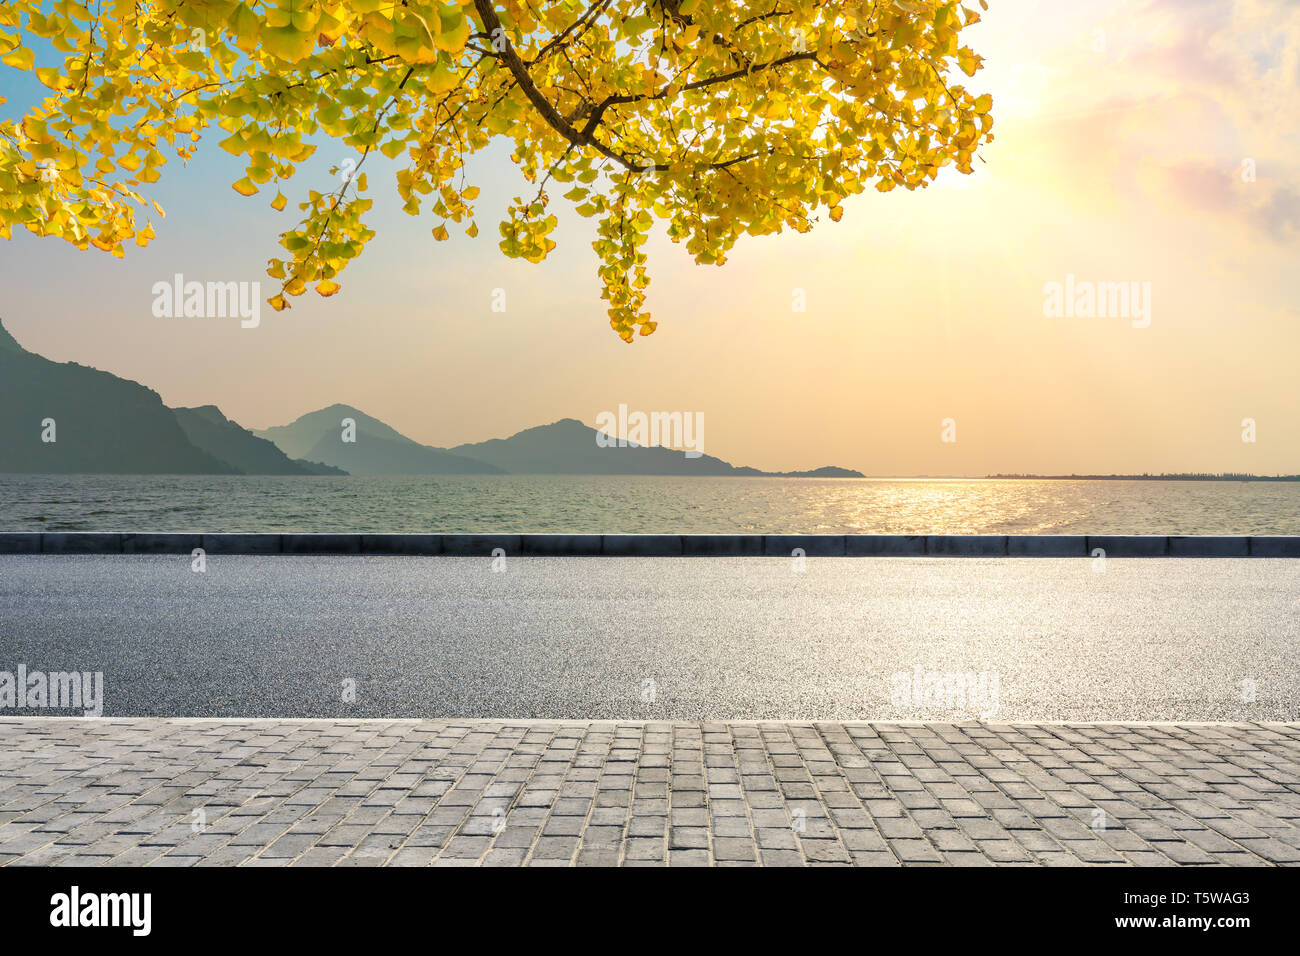 Empty asphalt road and river with mountain landscape Stock Photo